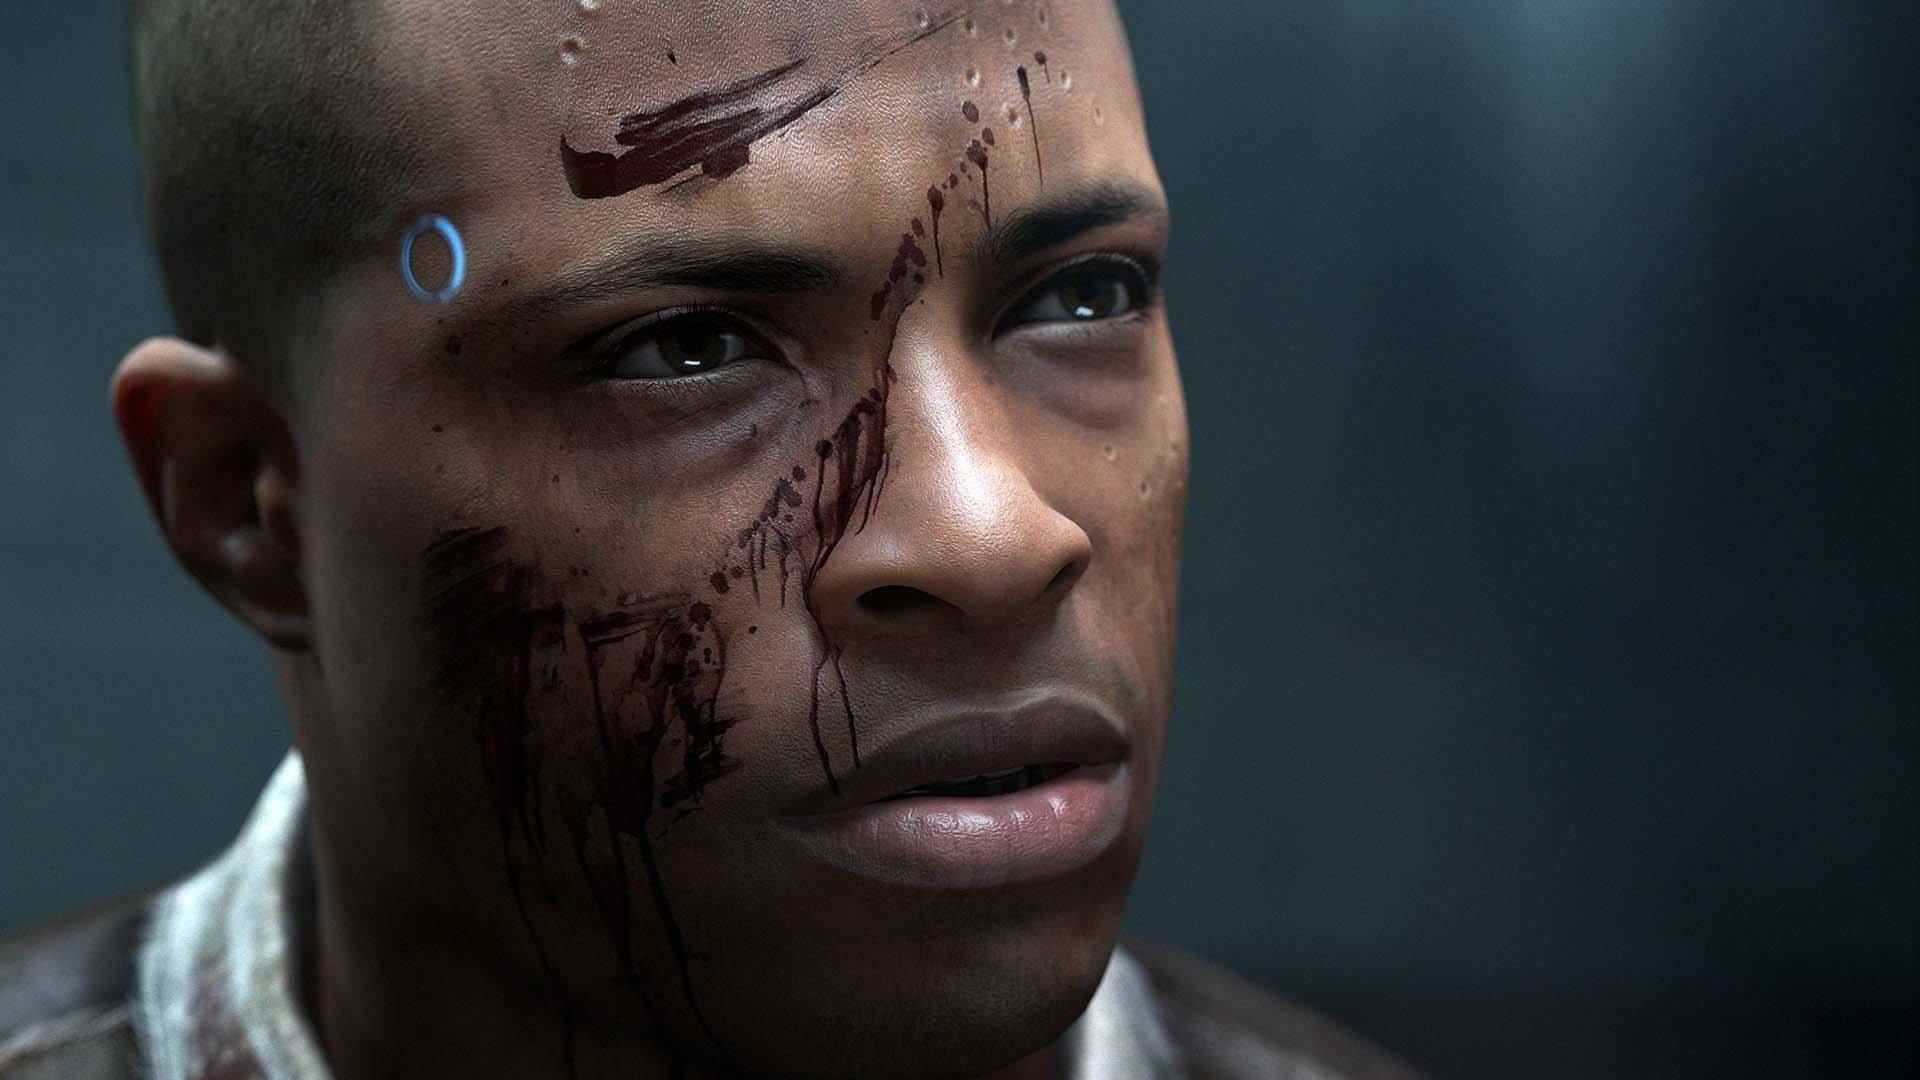 Detroit: Become Human accessibility review - Can I Play That?